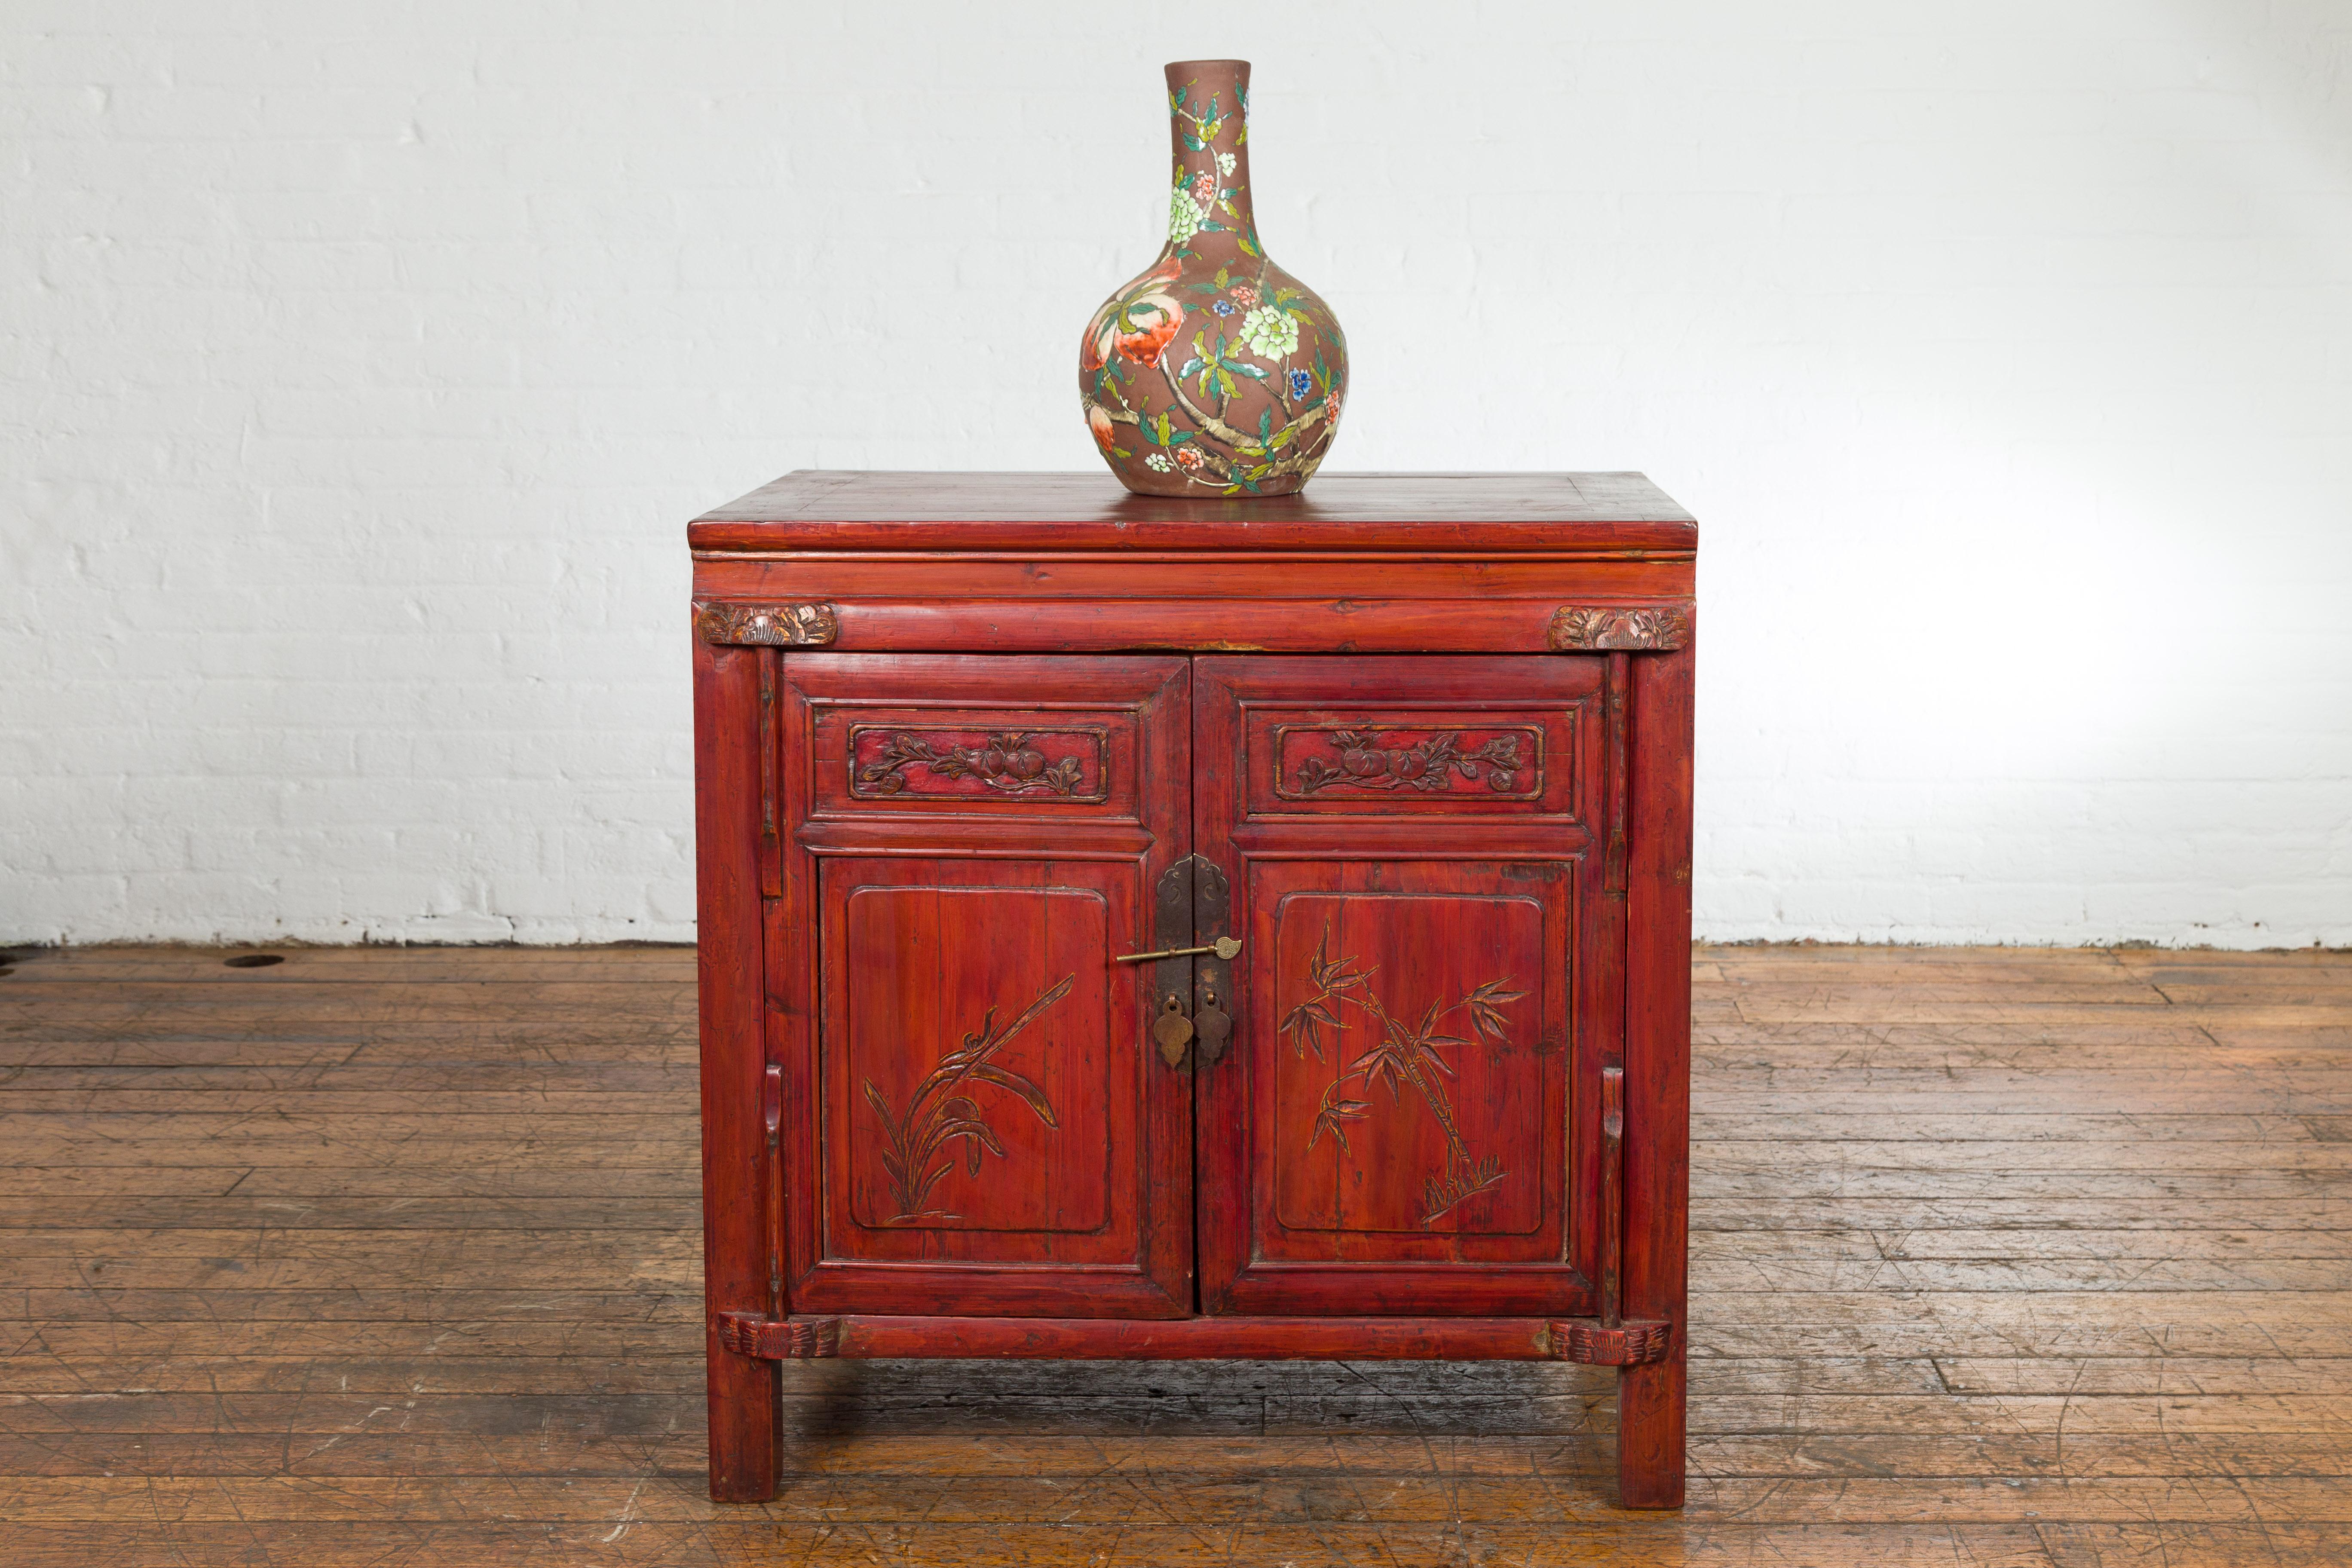 A Chinese late Qing Dynasty period bedside cabinet from the early 20th century, with red lacquer, two doors, hidden drawers, carved décor and brass hardware. Created in China during the late Qing Dynasty period in the early years of the 20th